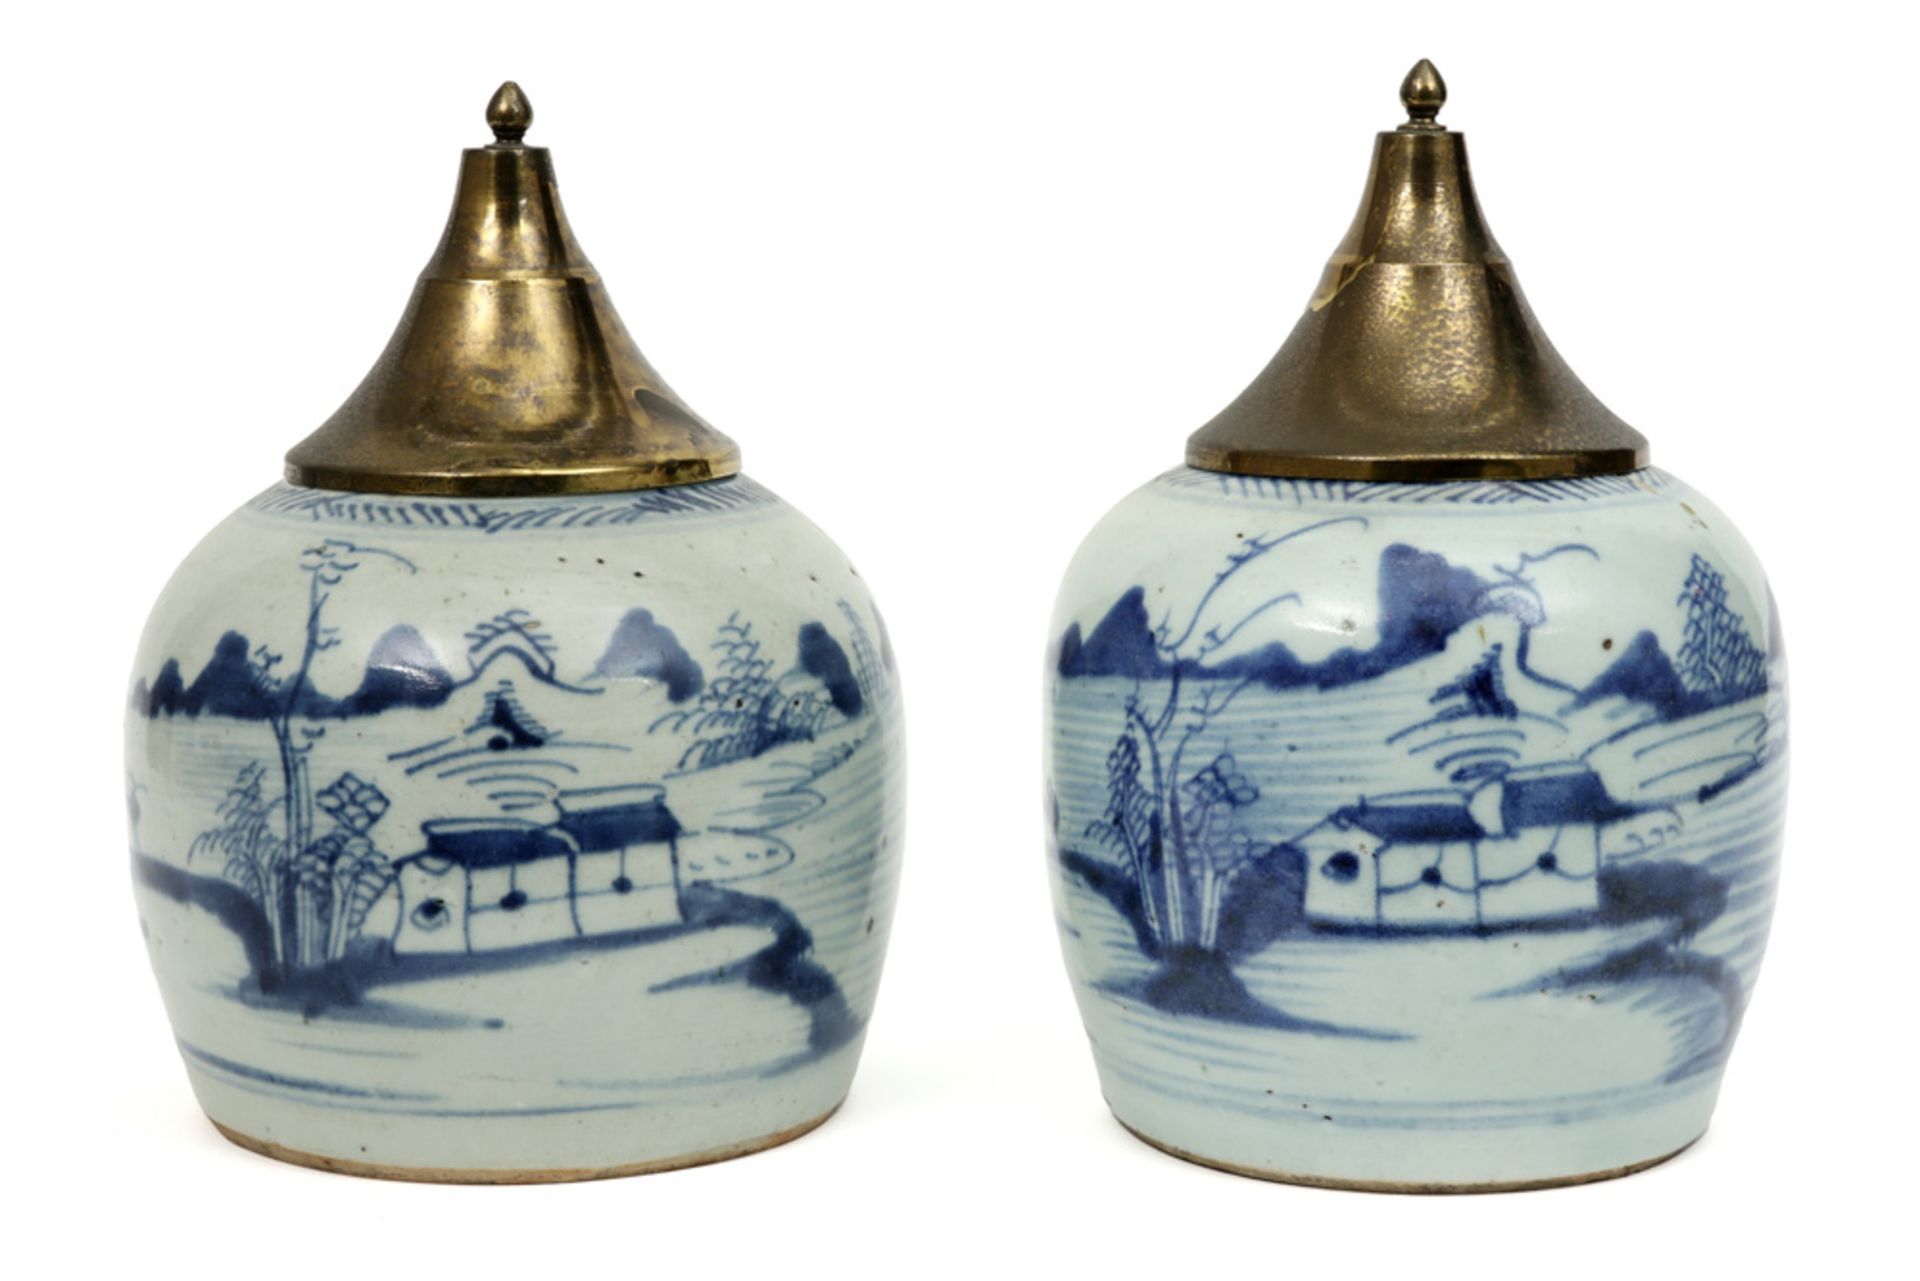 pair of antique Chinese jars in porcelain with a blue-white decor - each with an antique brass lid